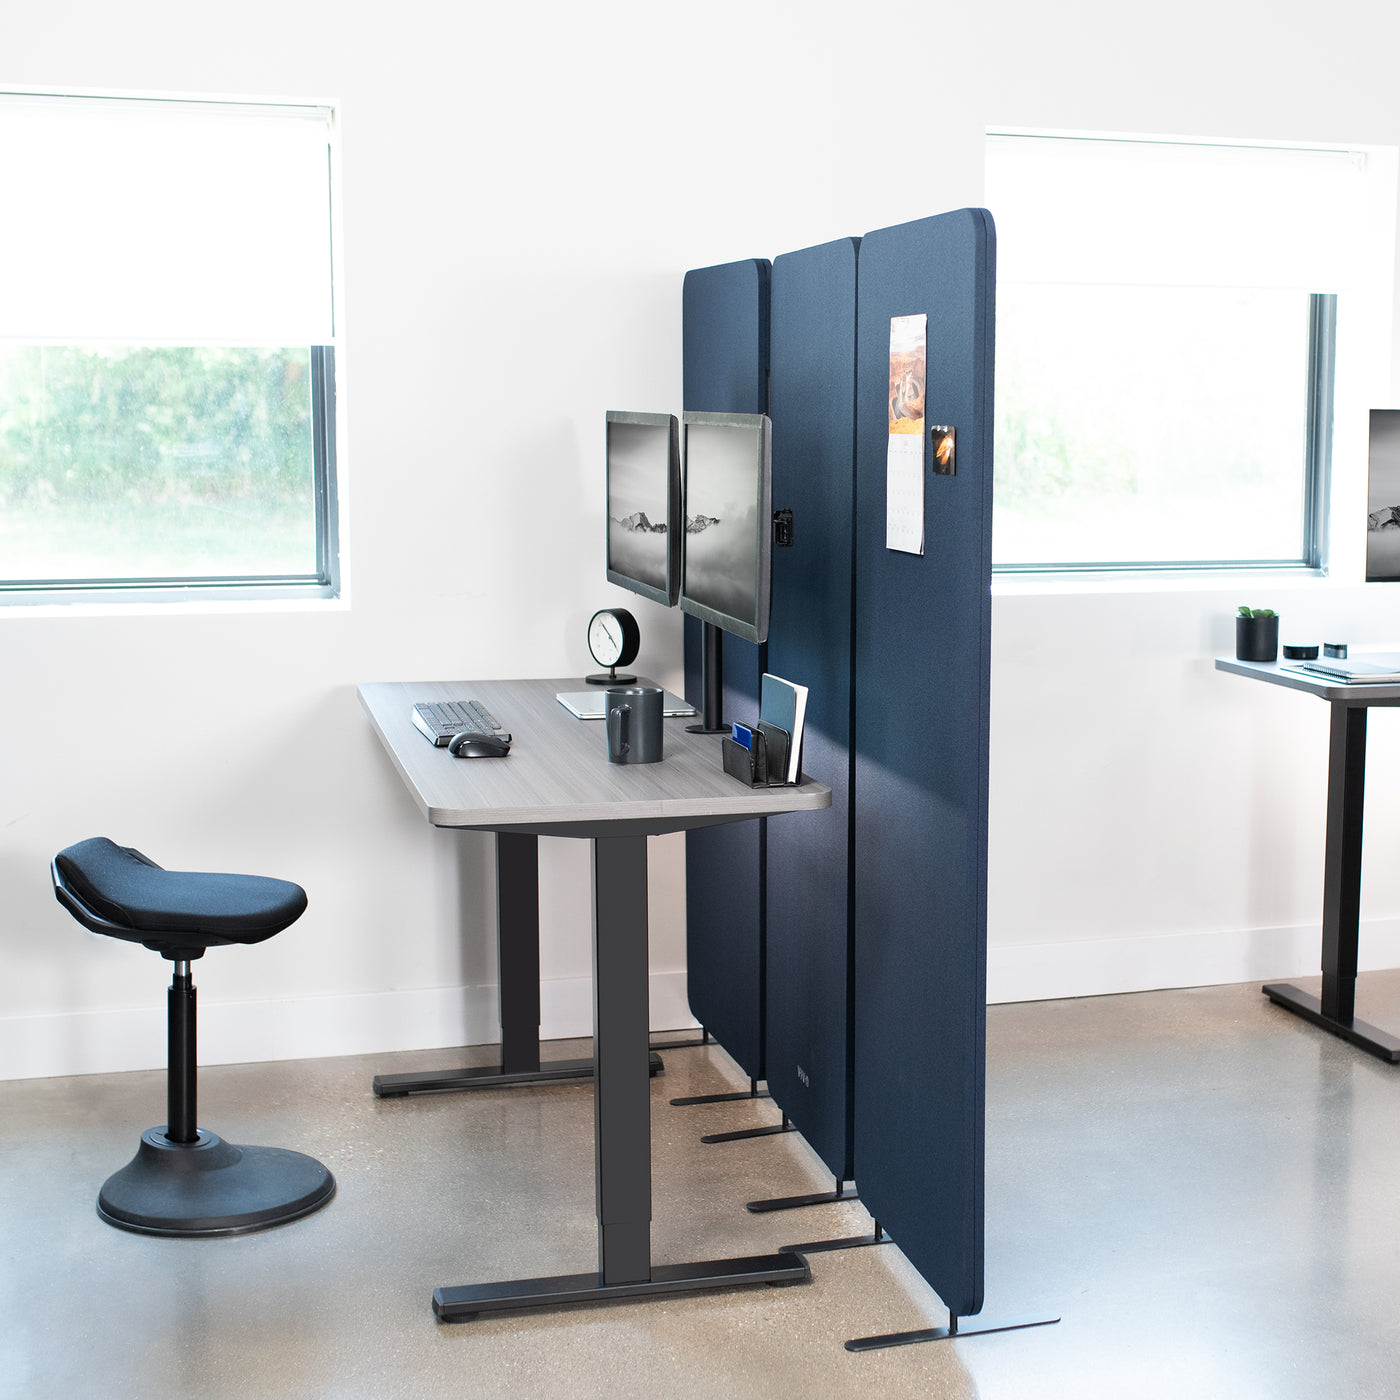 3-Panel Navy Blue Freestanding Room Divider provides a convenient partition and workspace privacy.